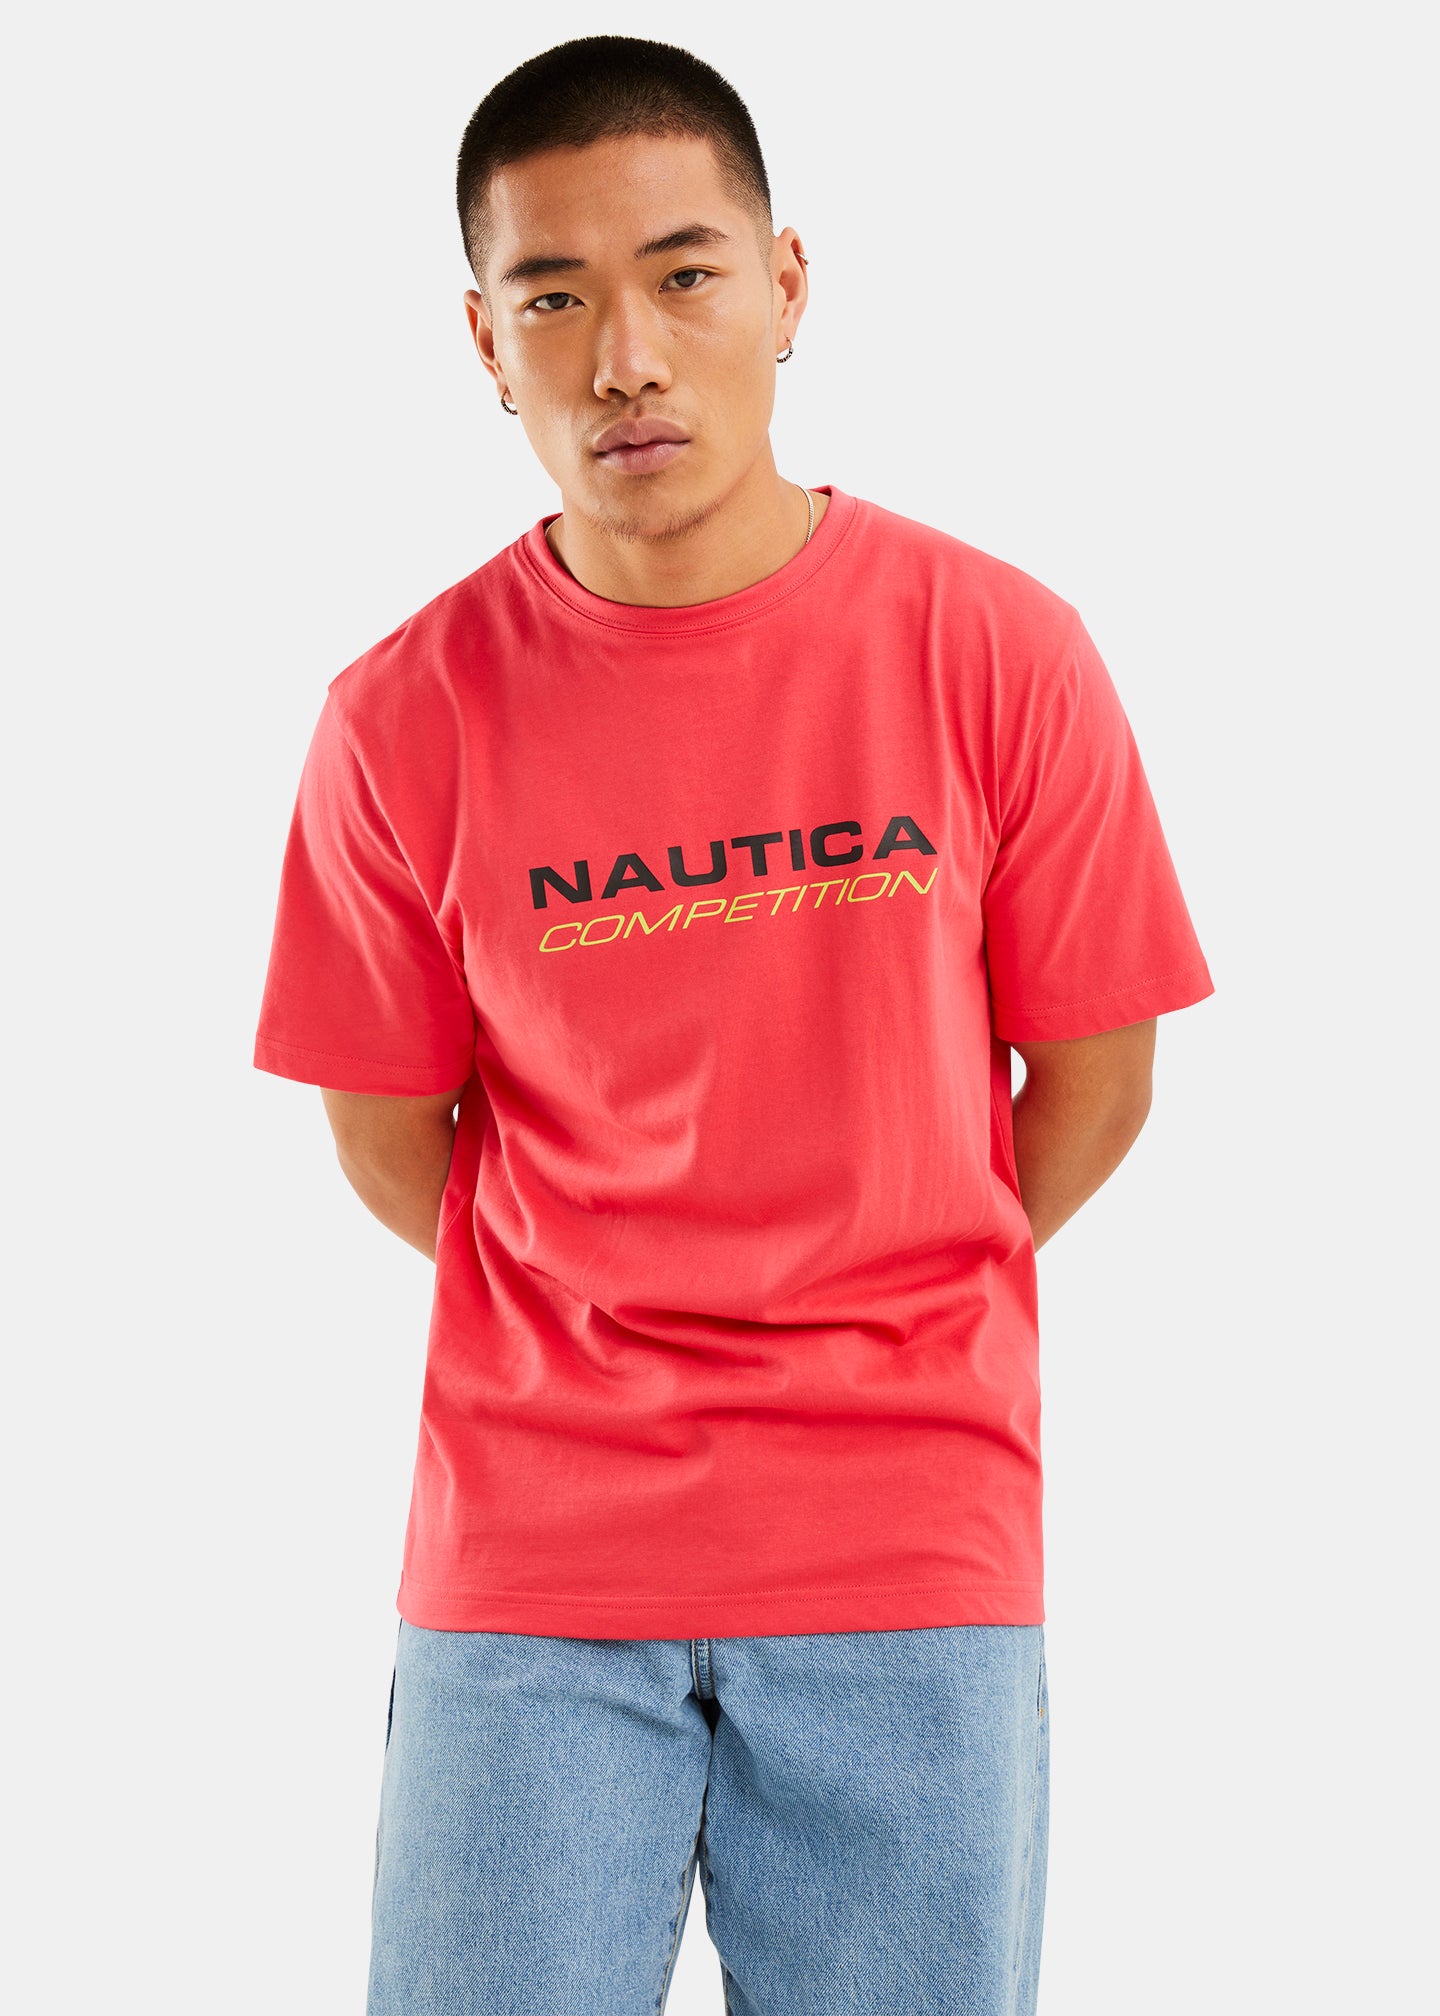 Nautica Competition Mack T-Shirt - Pink - Front